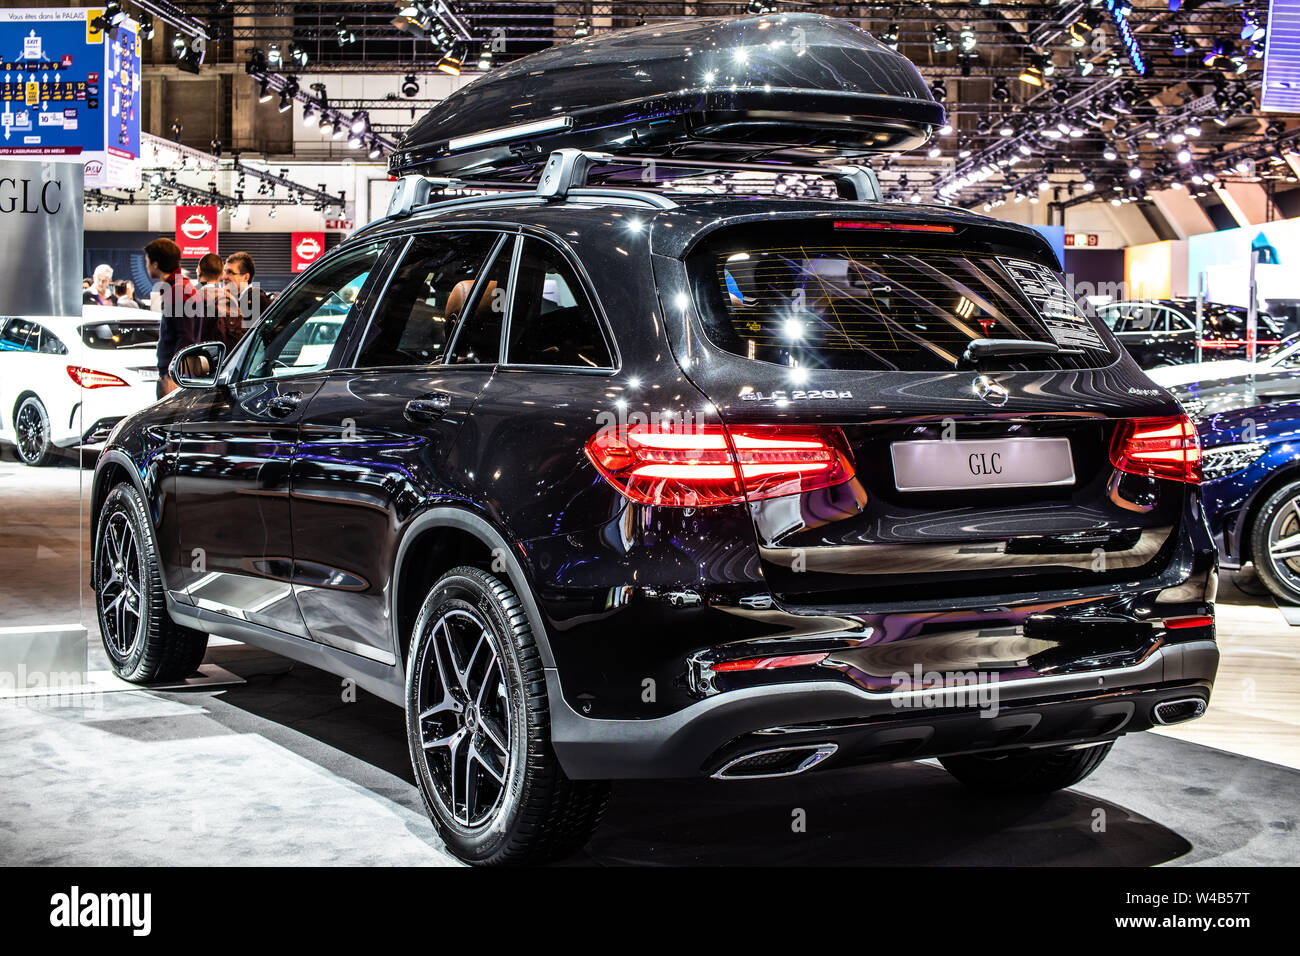 Brussels, Belgium, Jan 2019: Mercedes GLC 220d 4Matic SUV at Brussels Motor Show, First generation X253 car produced by Mercedes-Benz Stock Photo